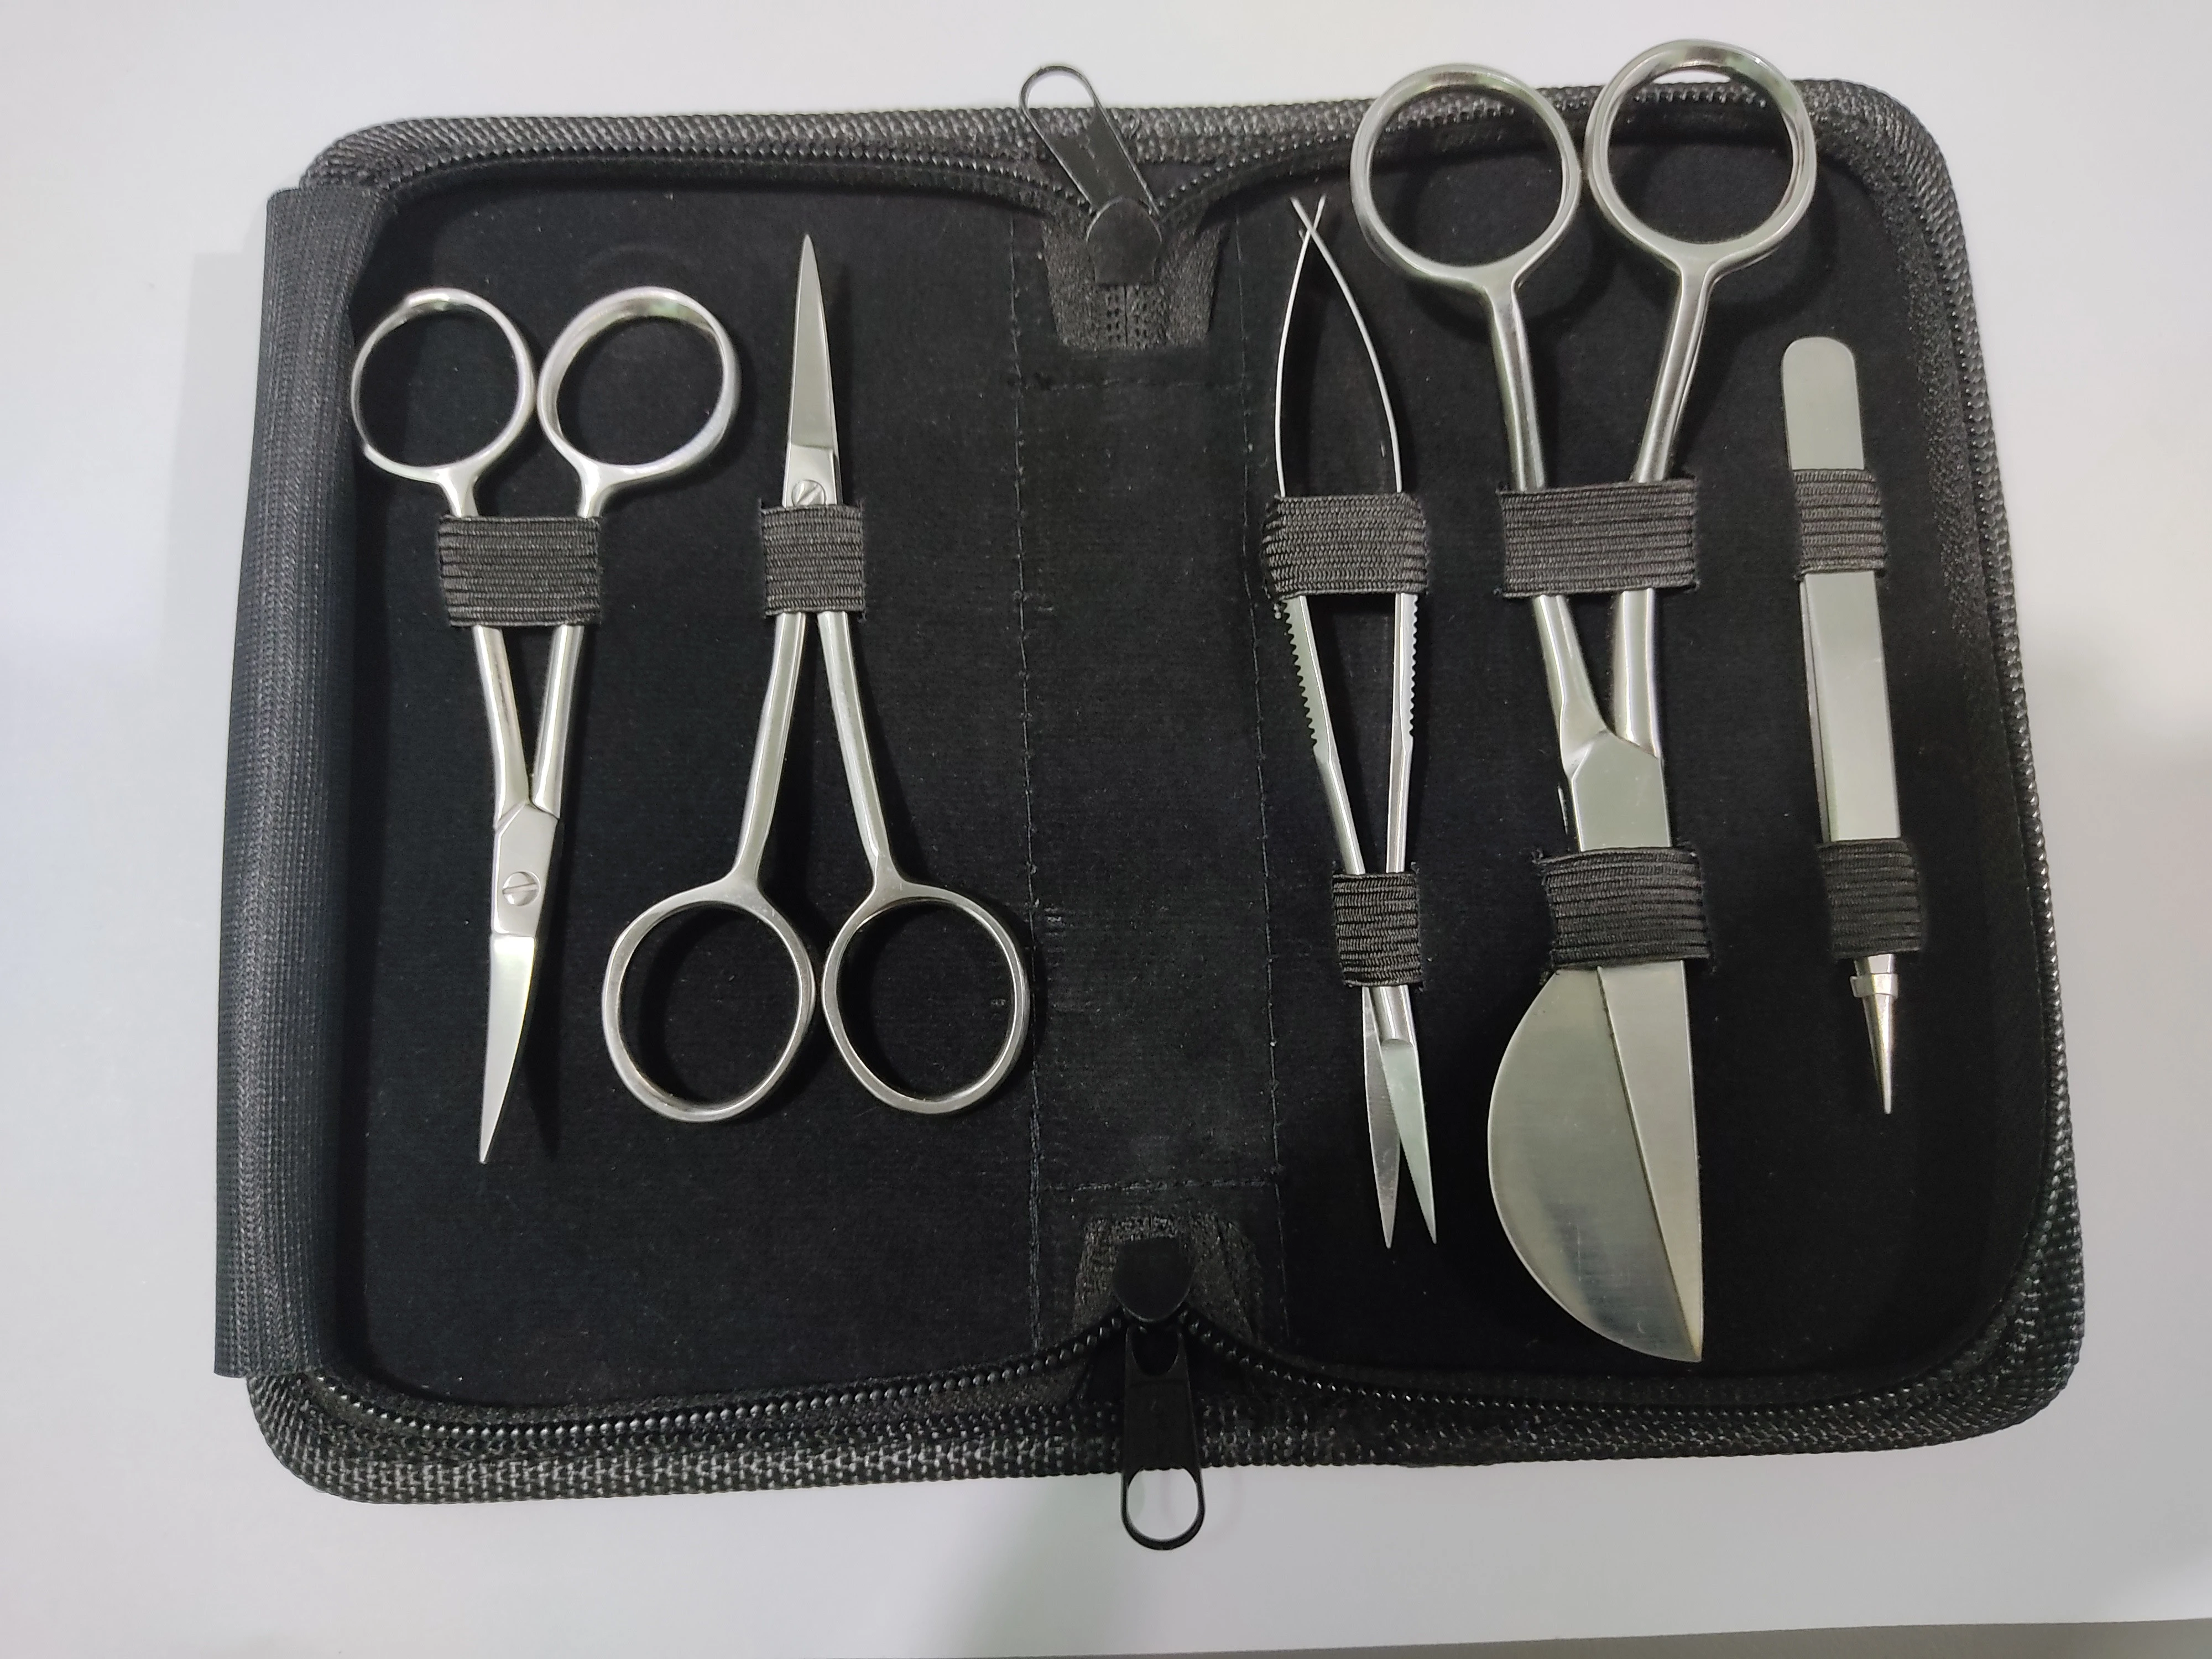 Embroidery/Quilting/Sewing Scissors Kit Set with Leather Case